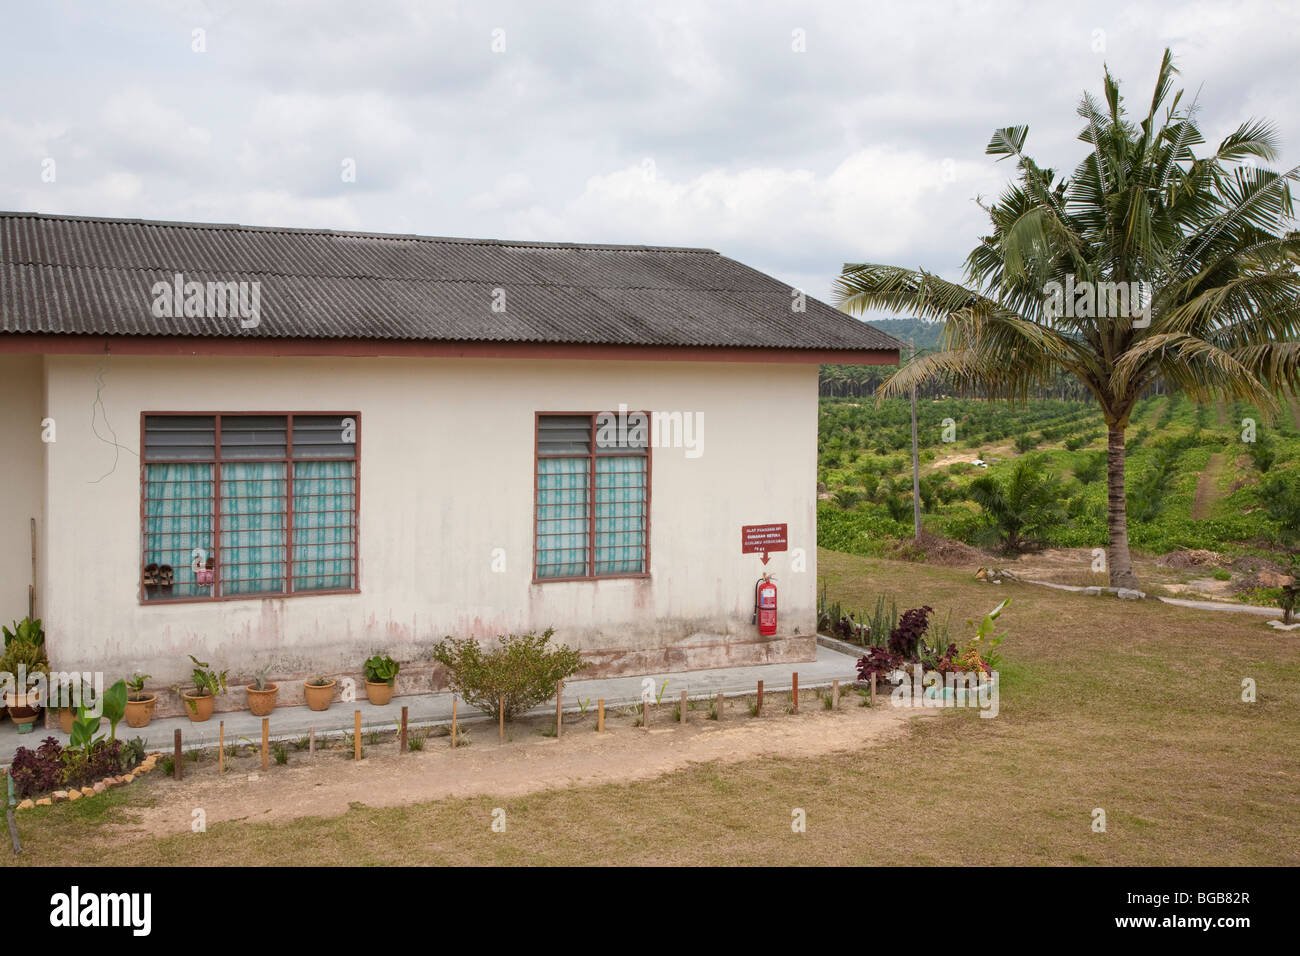 Company supplied housing near plantation. Employees can work towards purchase of their own home. Sindora Palm Oil Plantation. Stock Photo